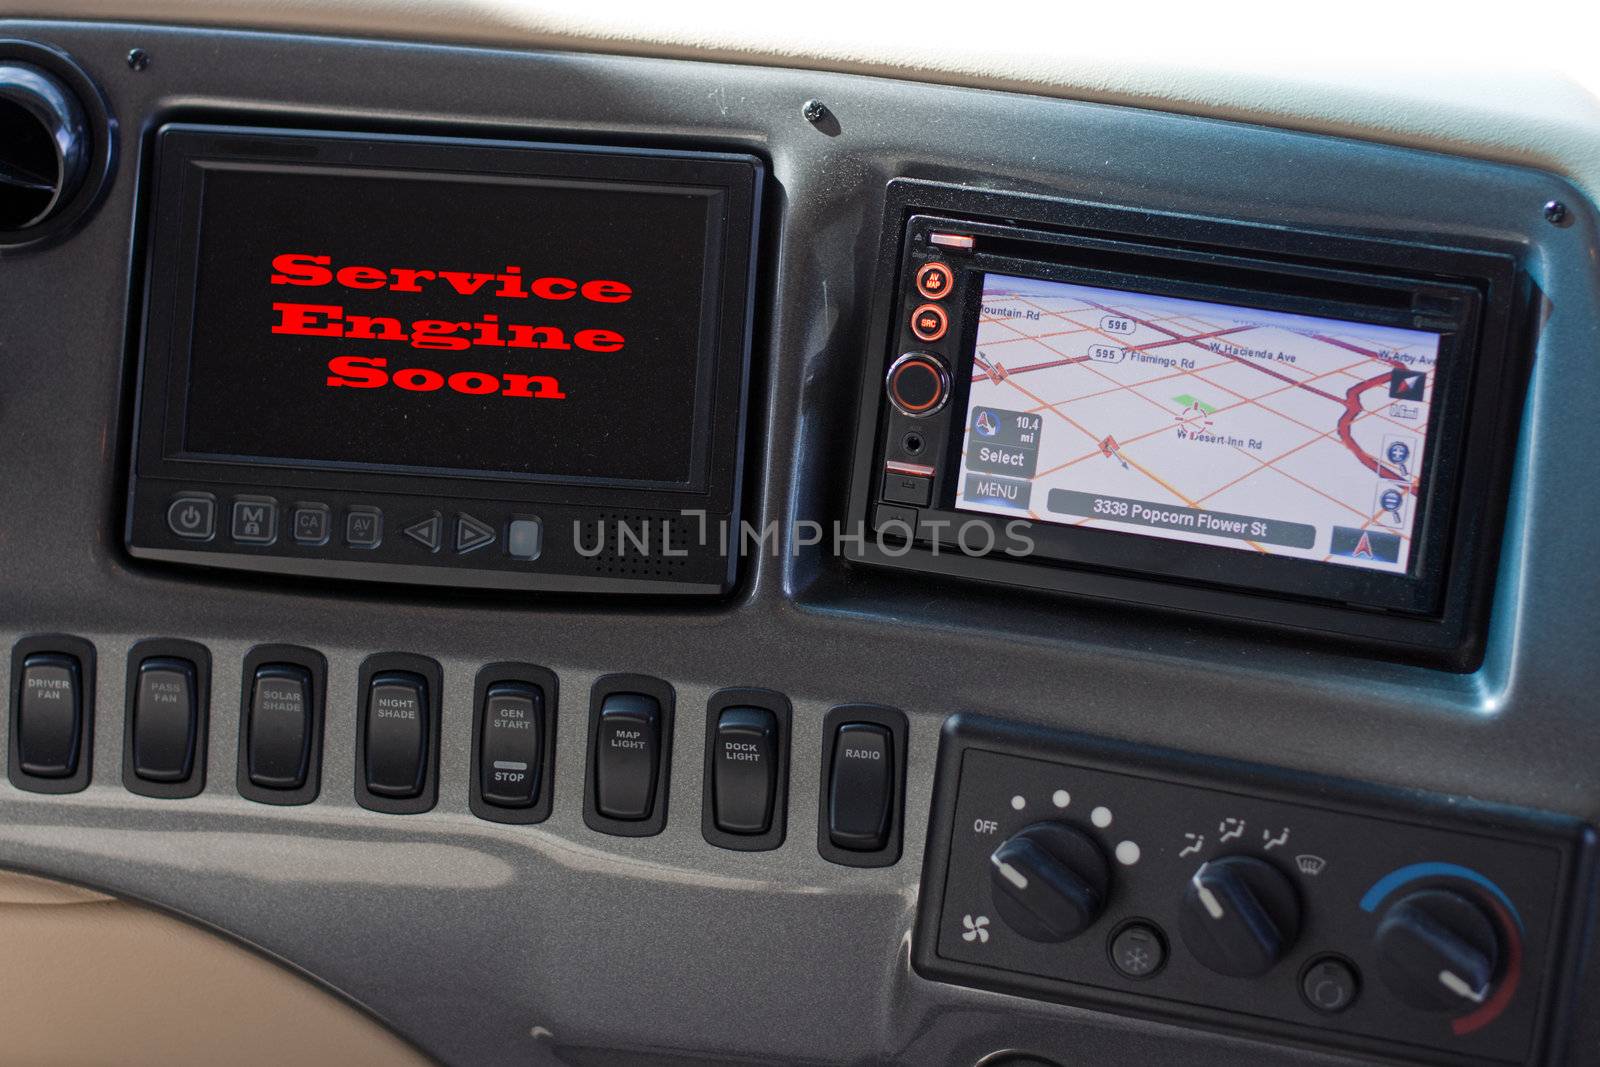 Motor home dashboard with service engine light and GPS